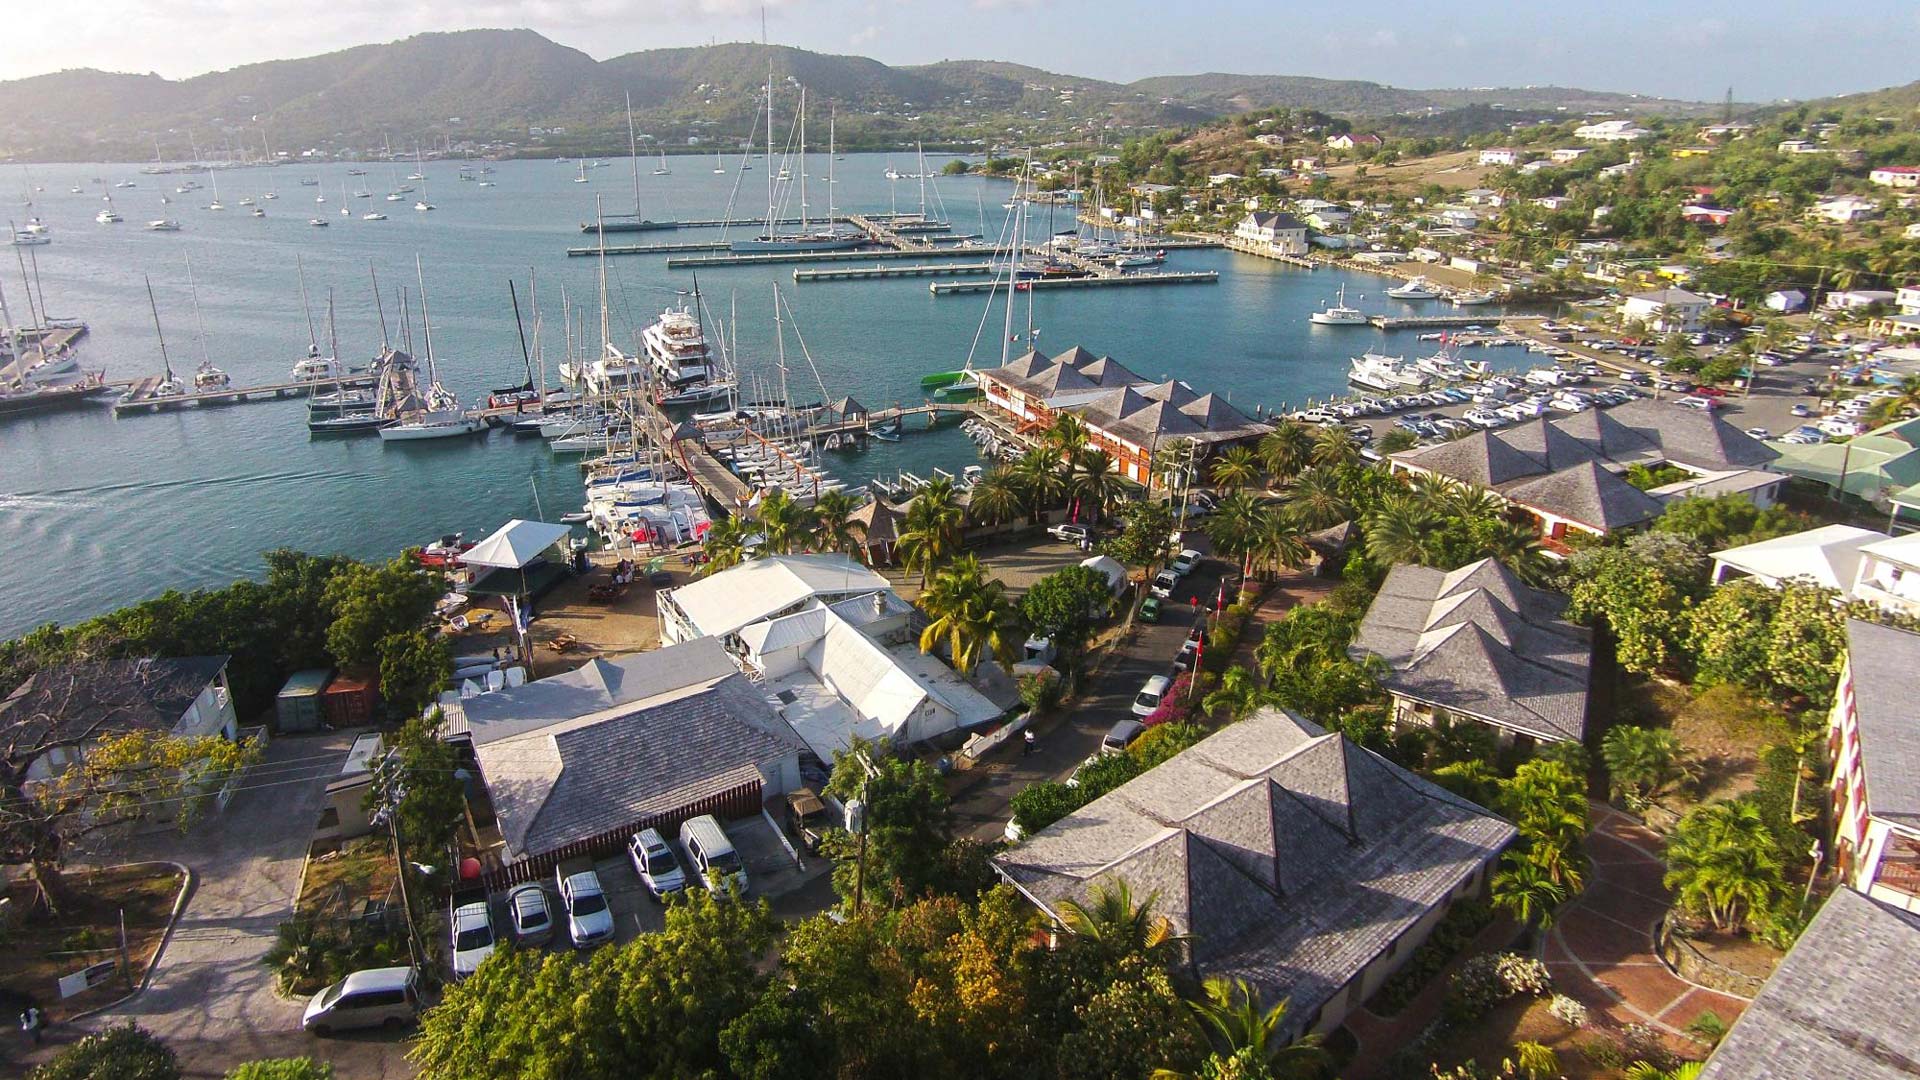 Antigua Yacht Club resort from above